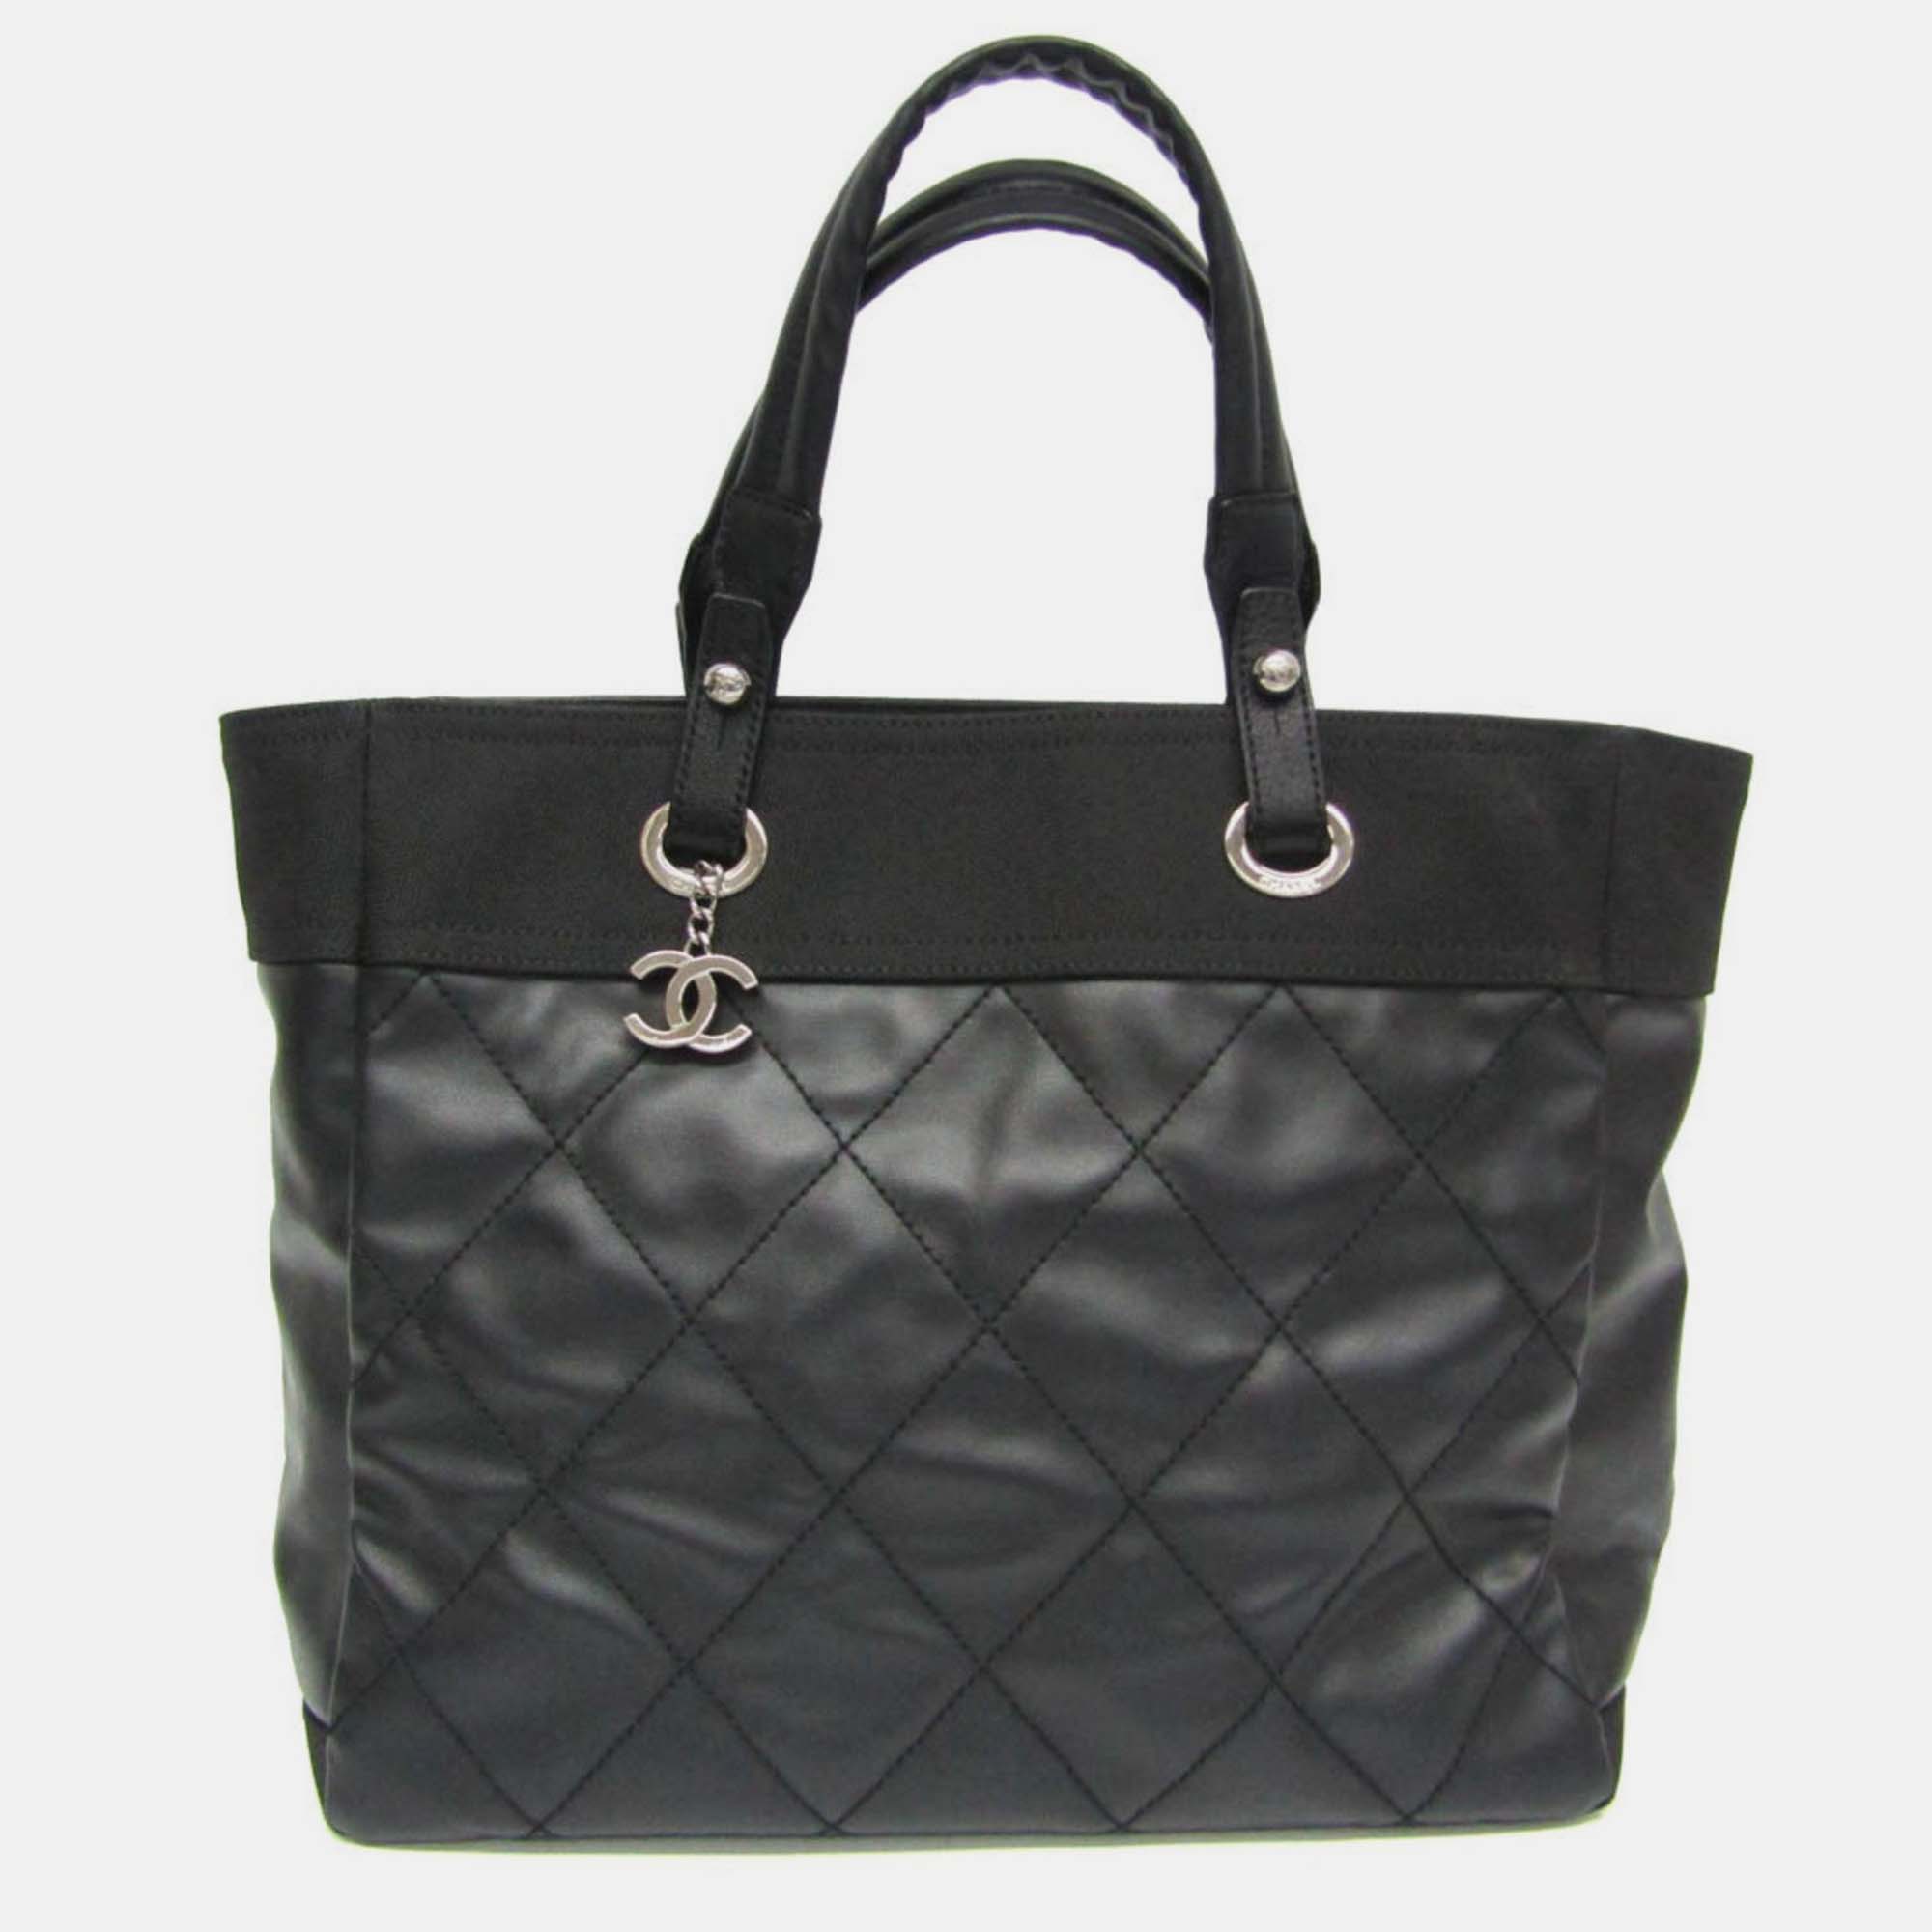 Chanel black quilted coated canvas large biarritz tote